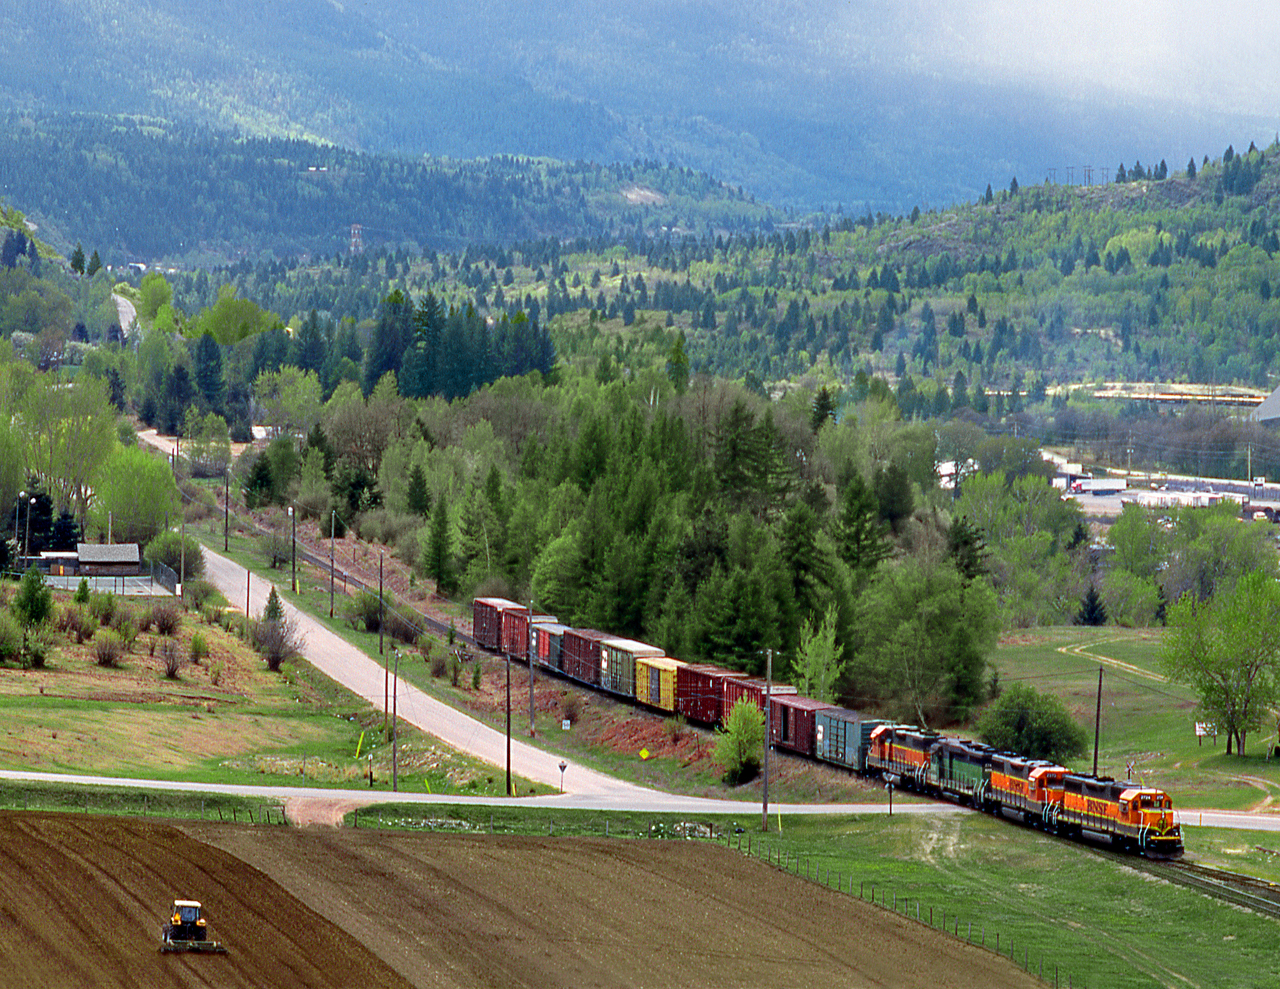 BNSF's Nelson Subdivision local out of Kettle Falls Wash. pulls into the back track at the end of BNSF owned track with cars for the Nelson & Fort Shepard Railroad, owned by Atco Lumber at Fruitvale. The NFS operates the ex GN line from Columbia Gardens 6 miles to Fruitvale. The balance of GN's historic line to Nelson is abandoned